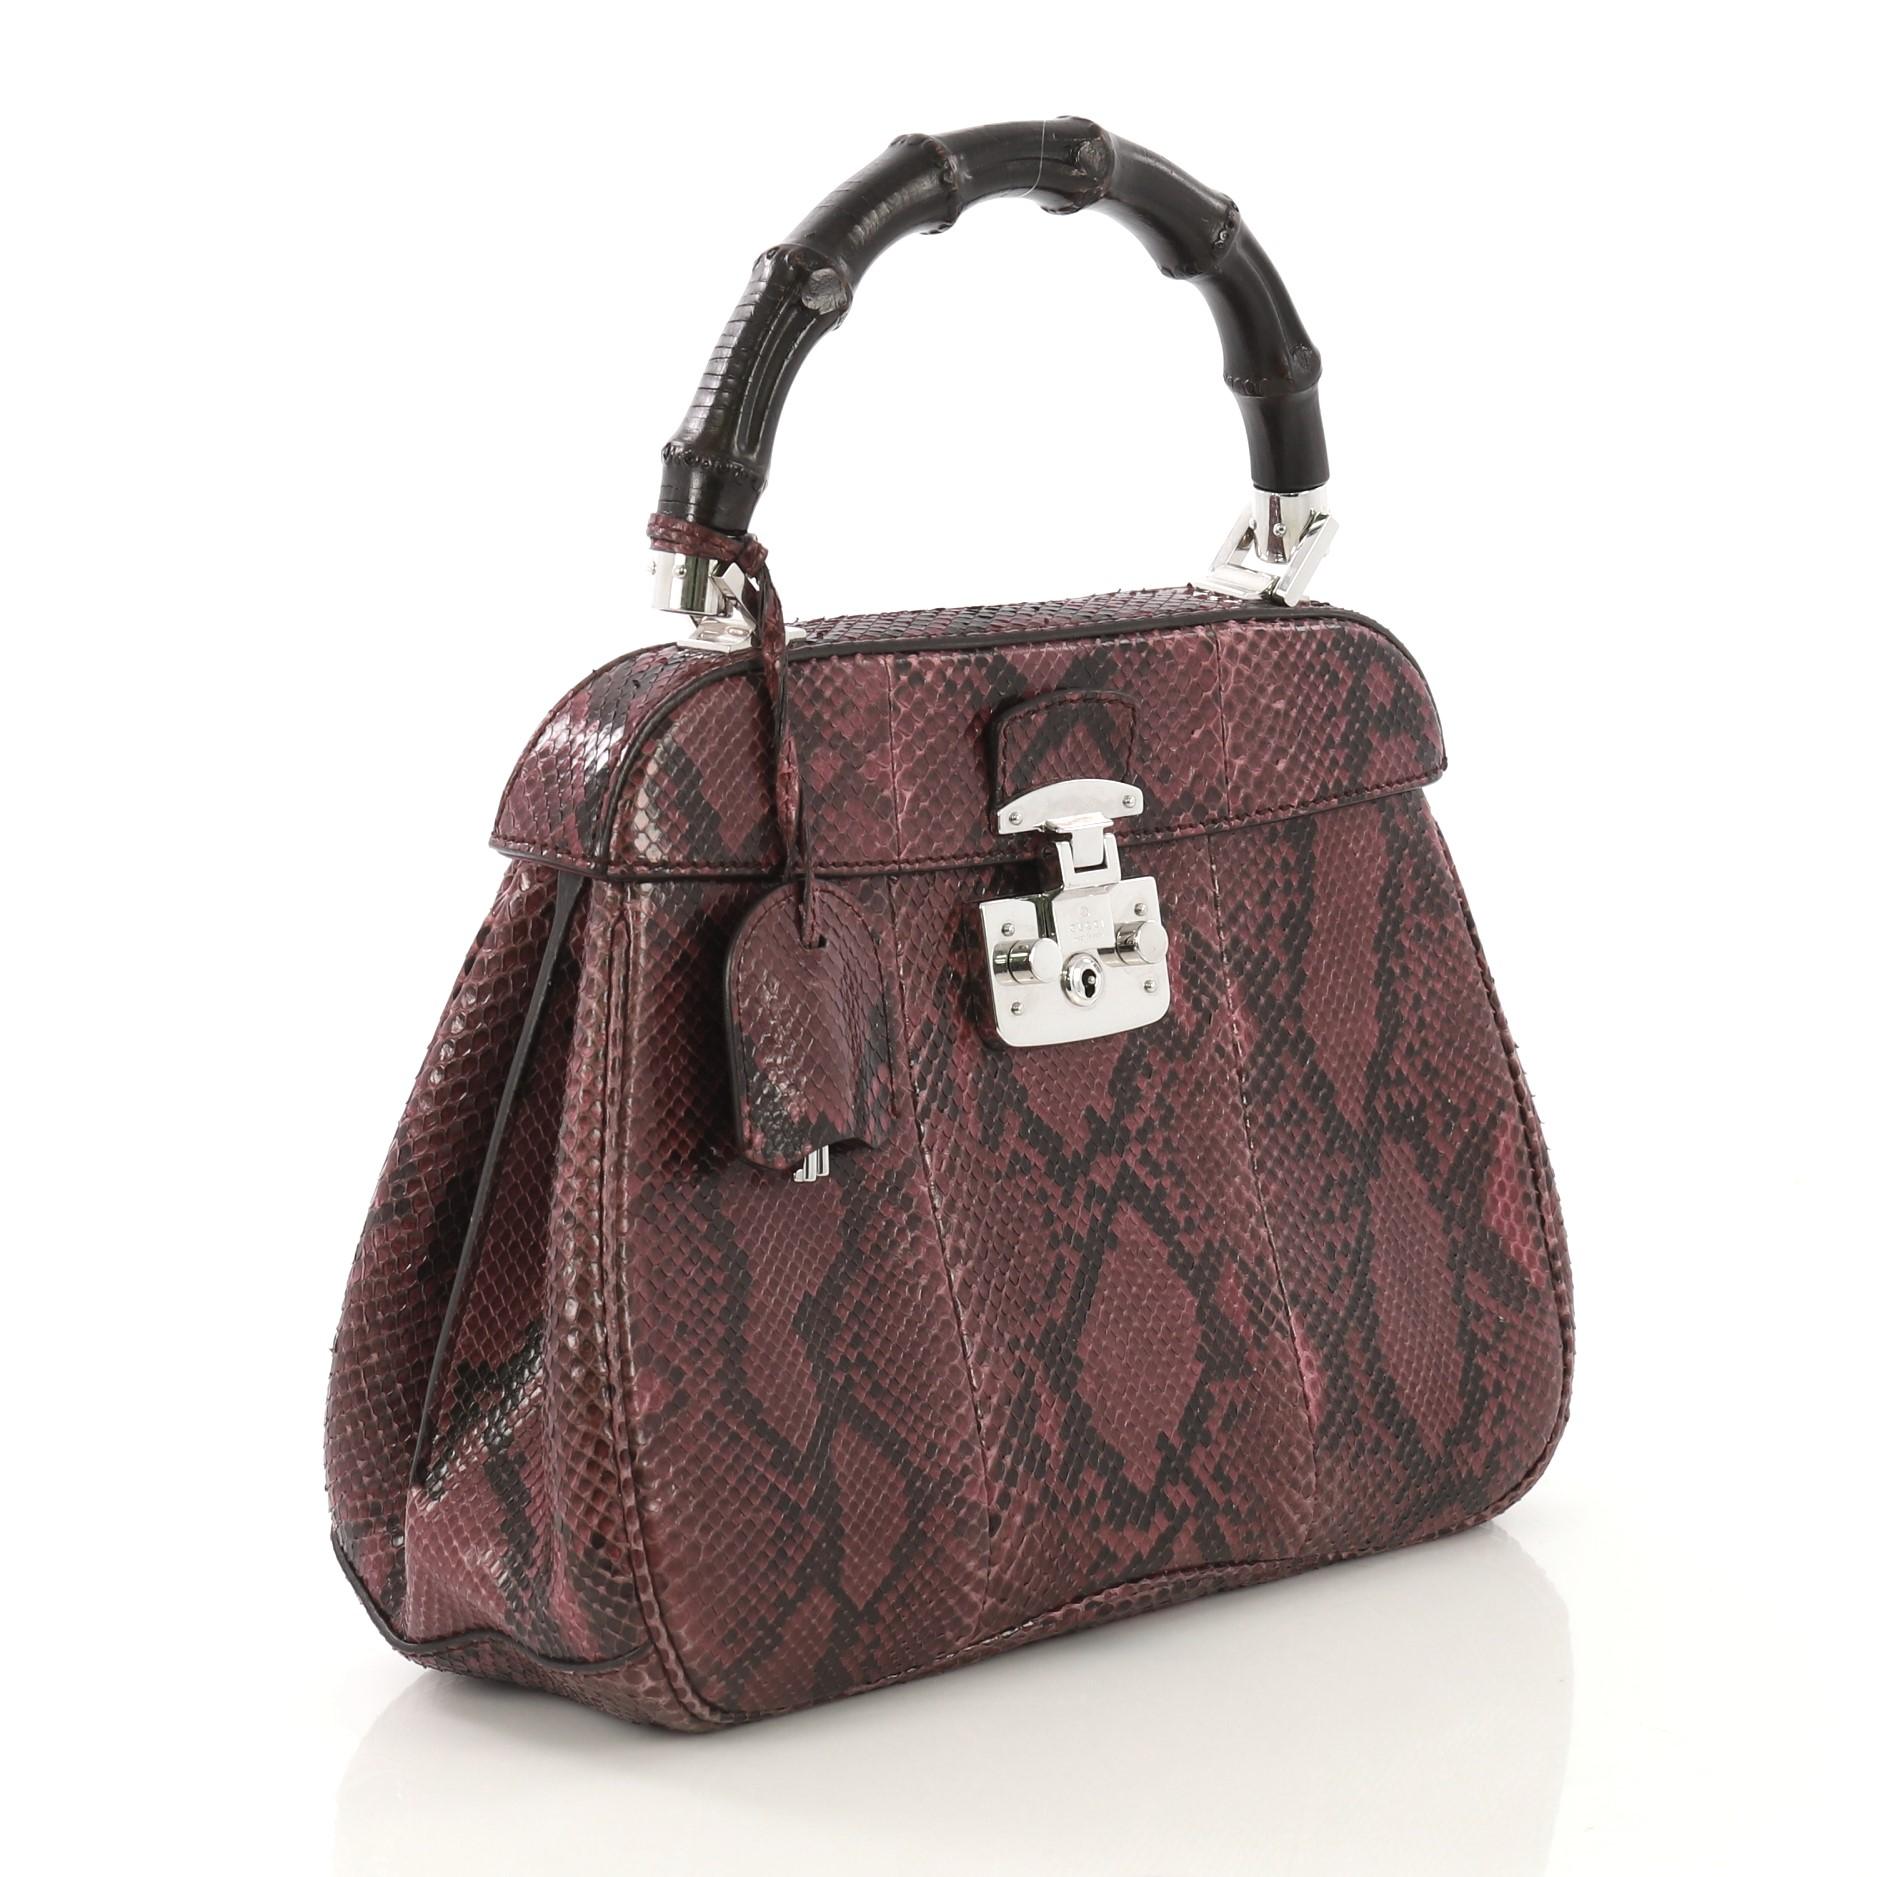 This Gucci Lady Lock Bamboo Top Handle Bag Python Medium, crafted in genuine purple python skin, features a single loop bamboo handle and silver-tone hardware. Its flap with lady lock closure opens to a purple suede interior divided into two